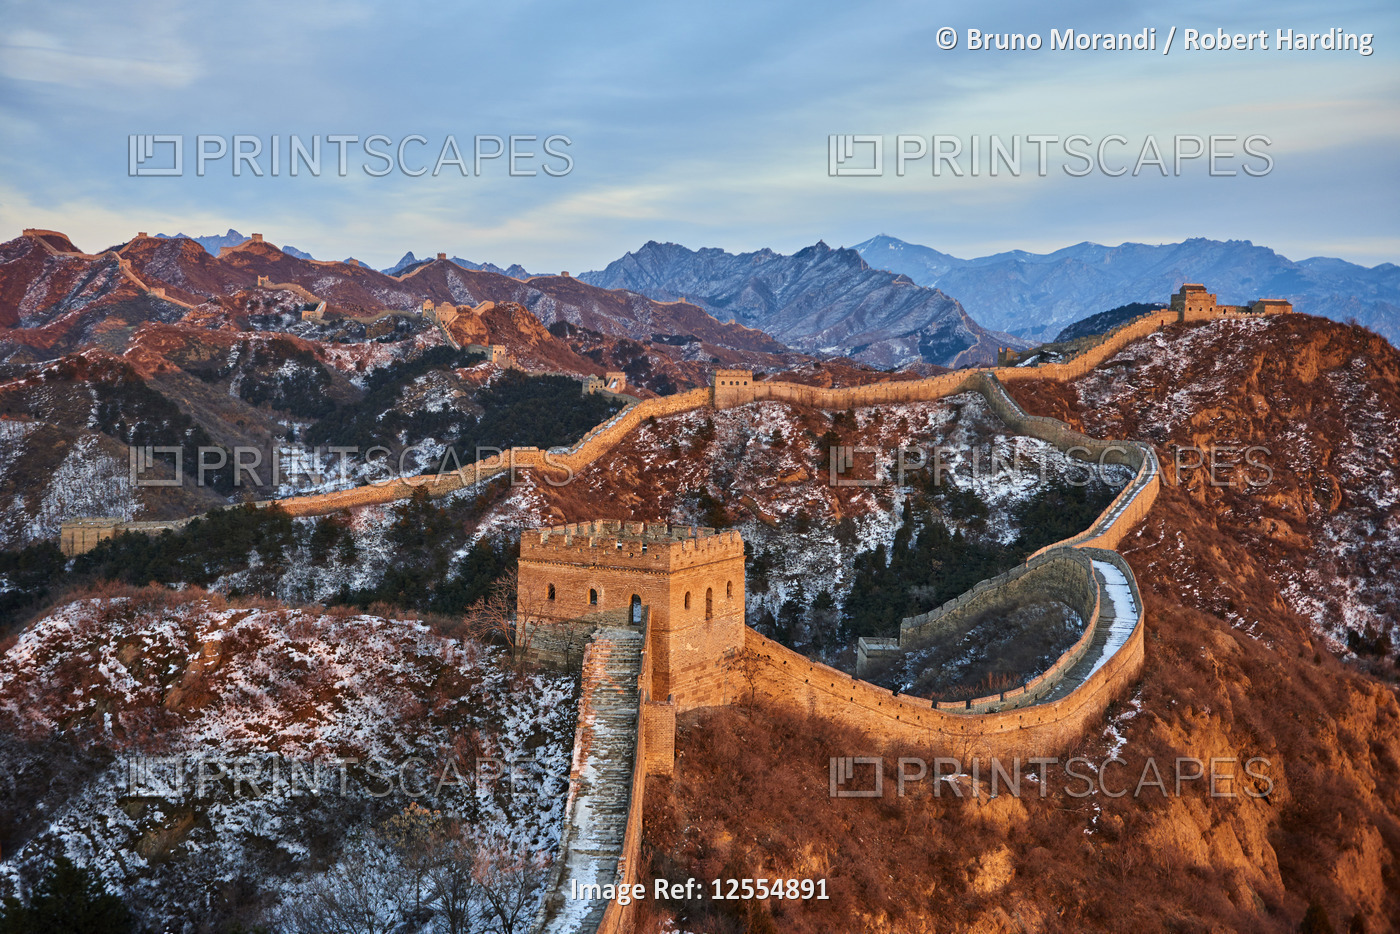 China, Hebei province, Great Wall of China, Jinshanling and Simatai section, Unesco World Heritage